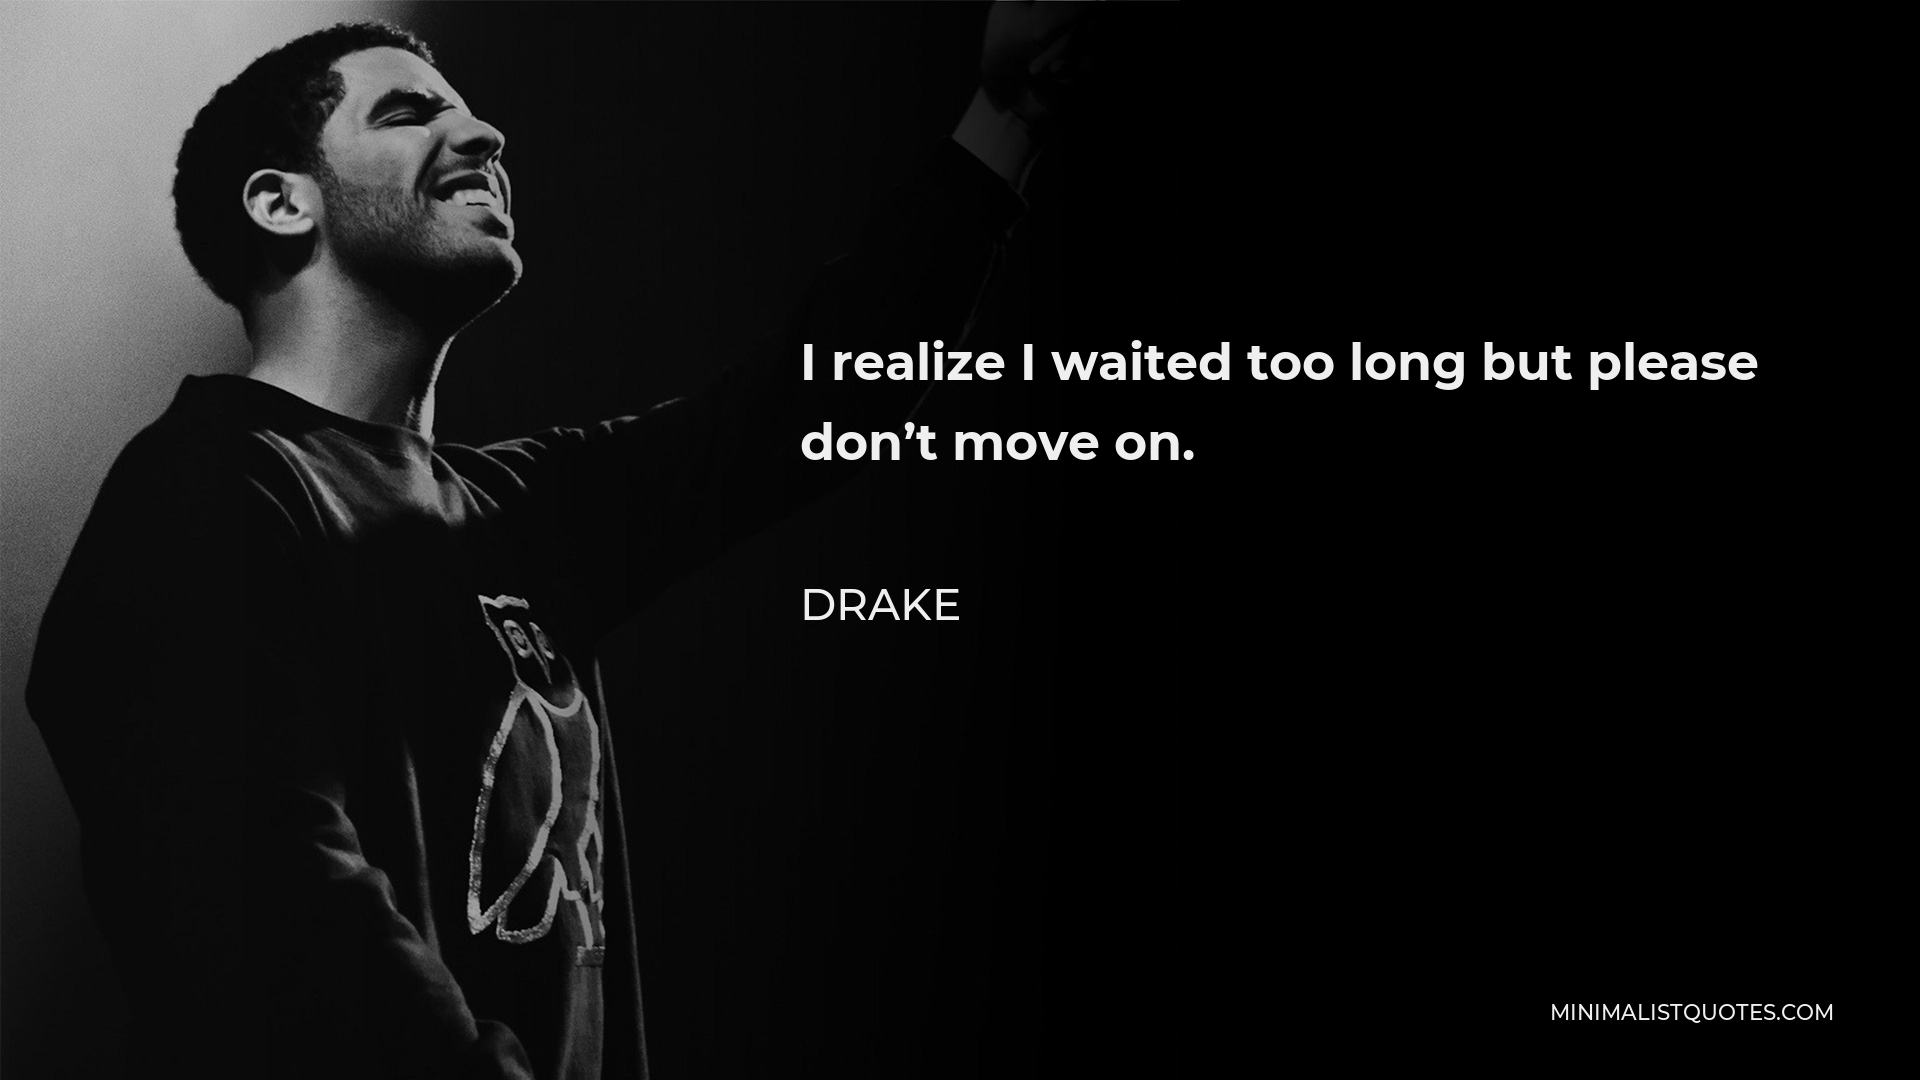 Drake Quote - I realize I waited too long but please don’t move on.